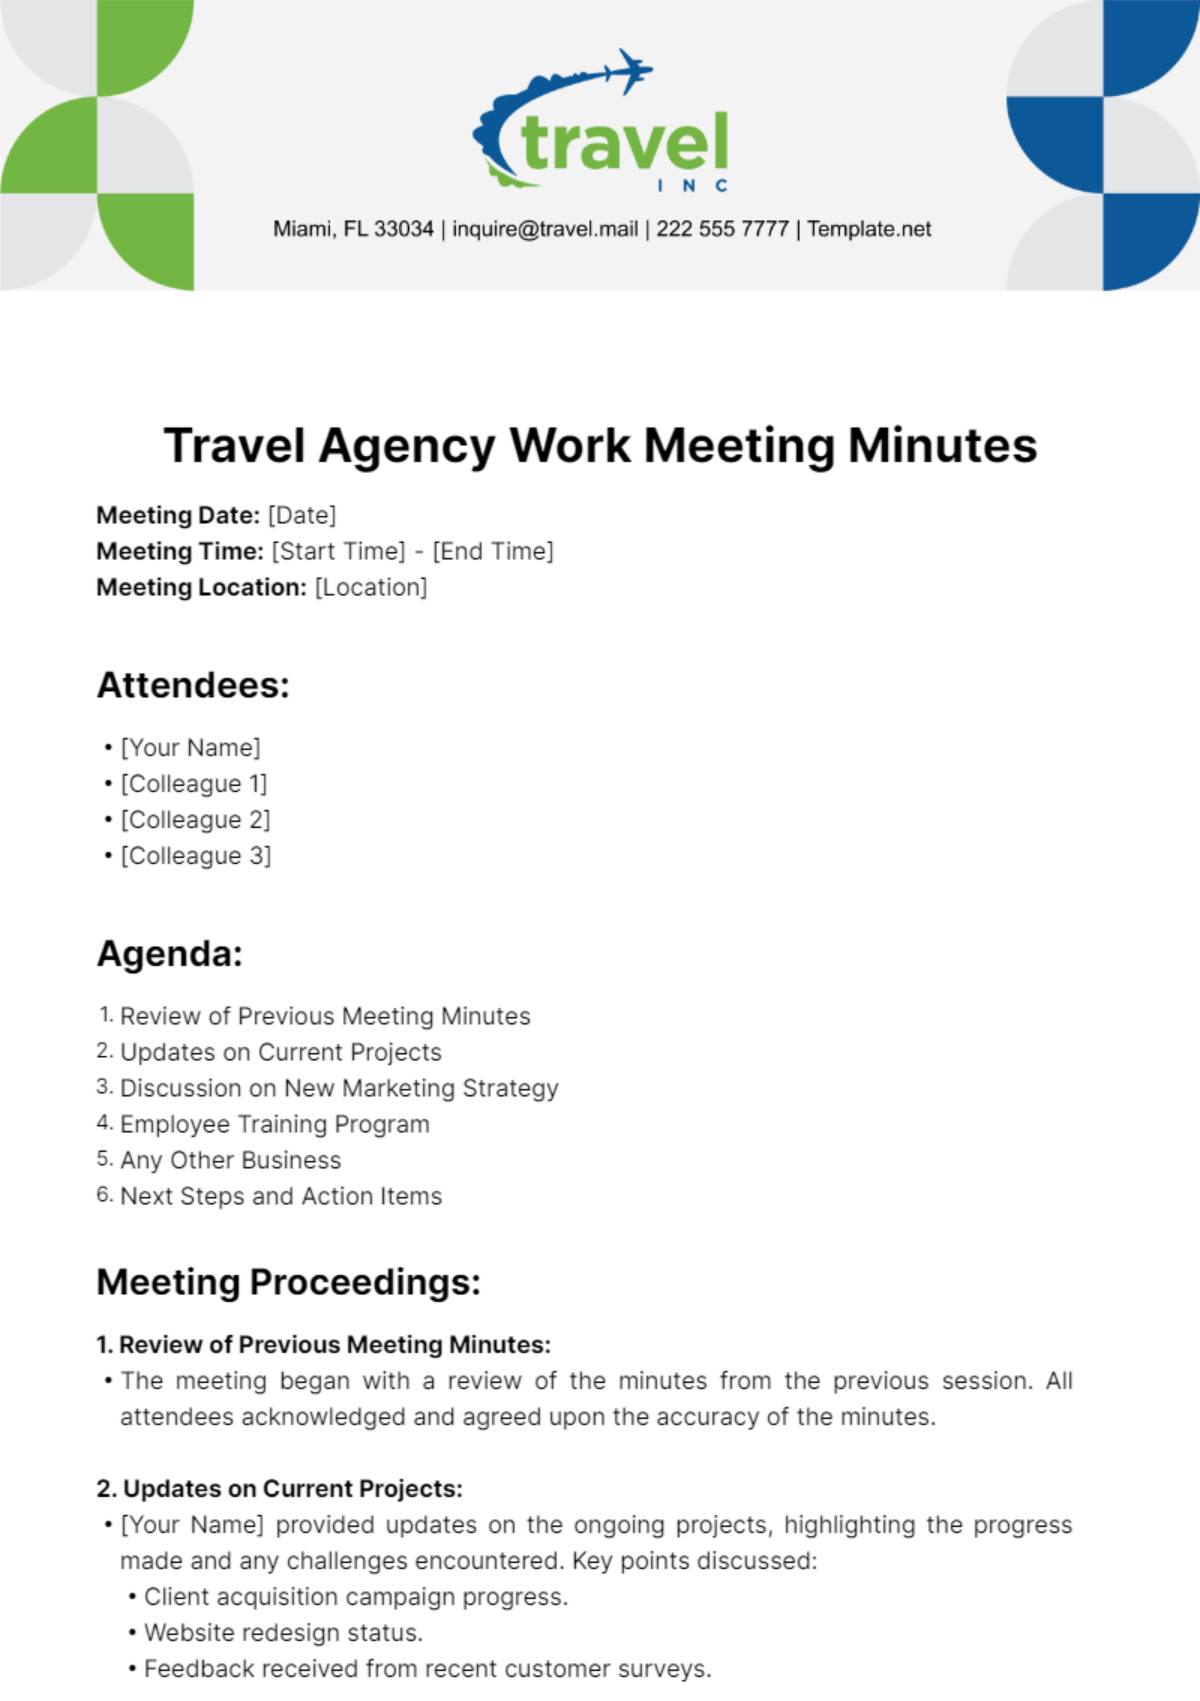 Free Travel Agency Work Meeting Minutes Template